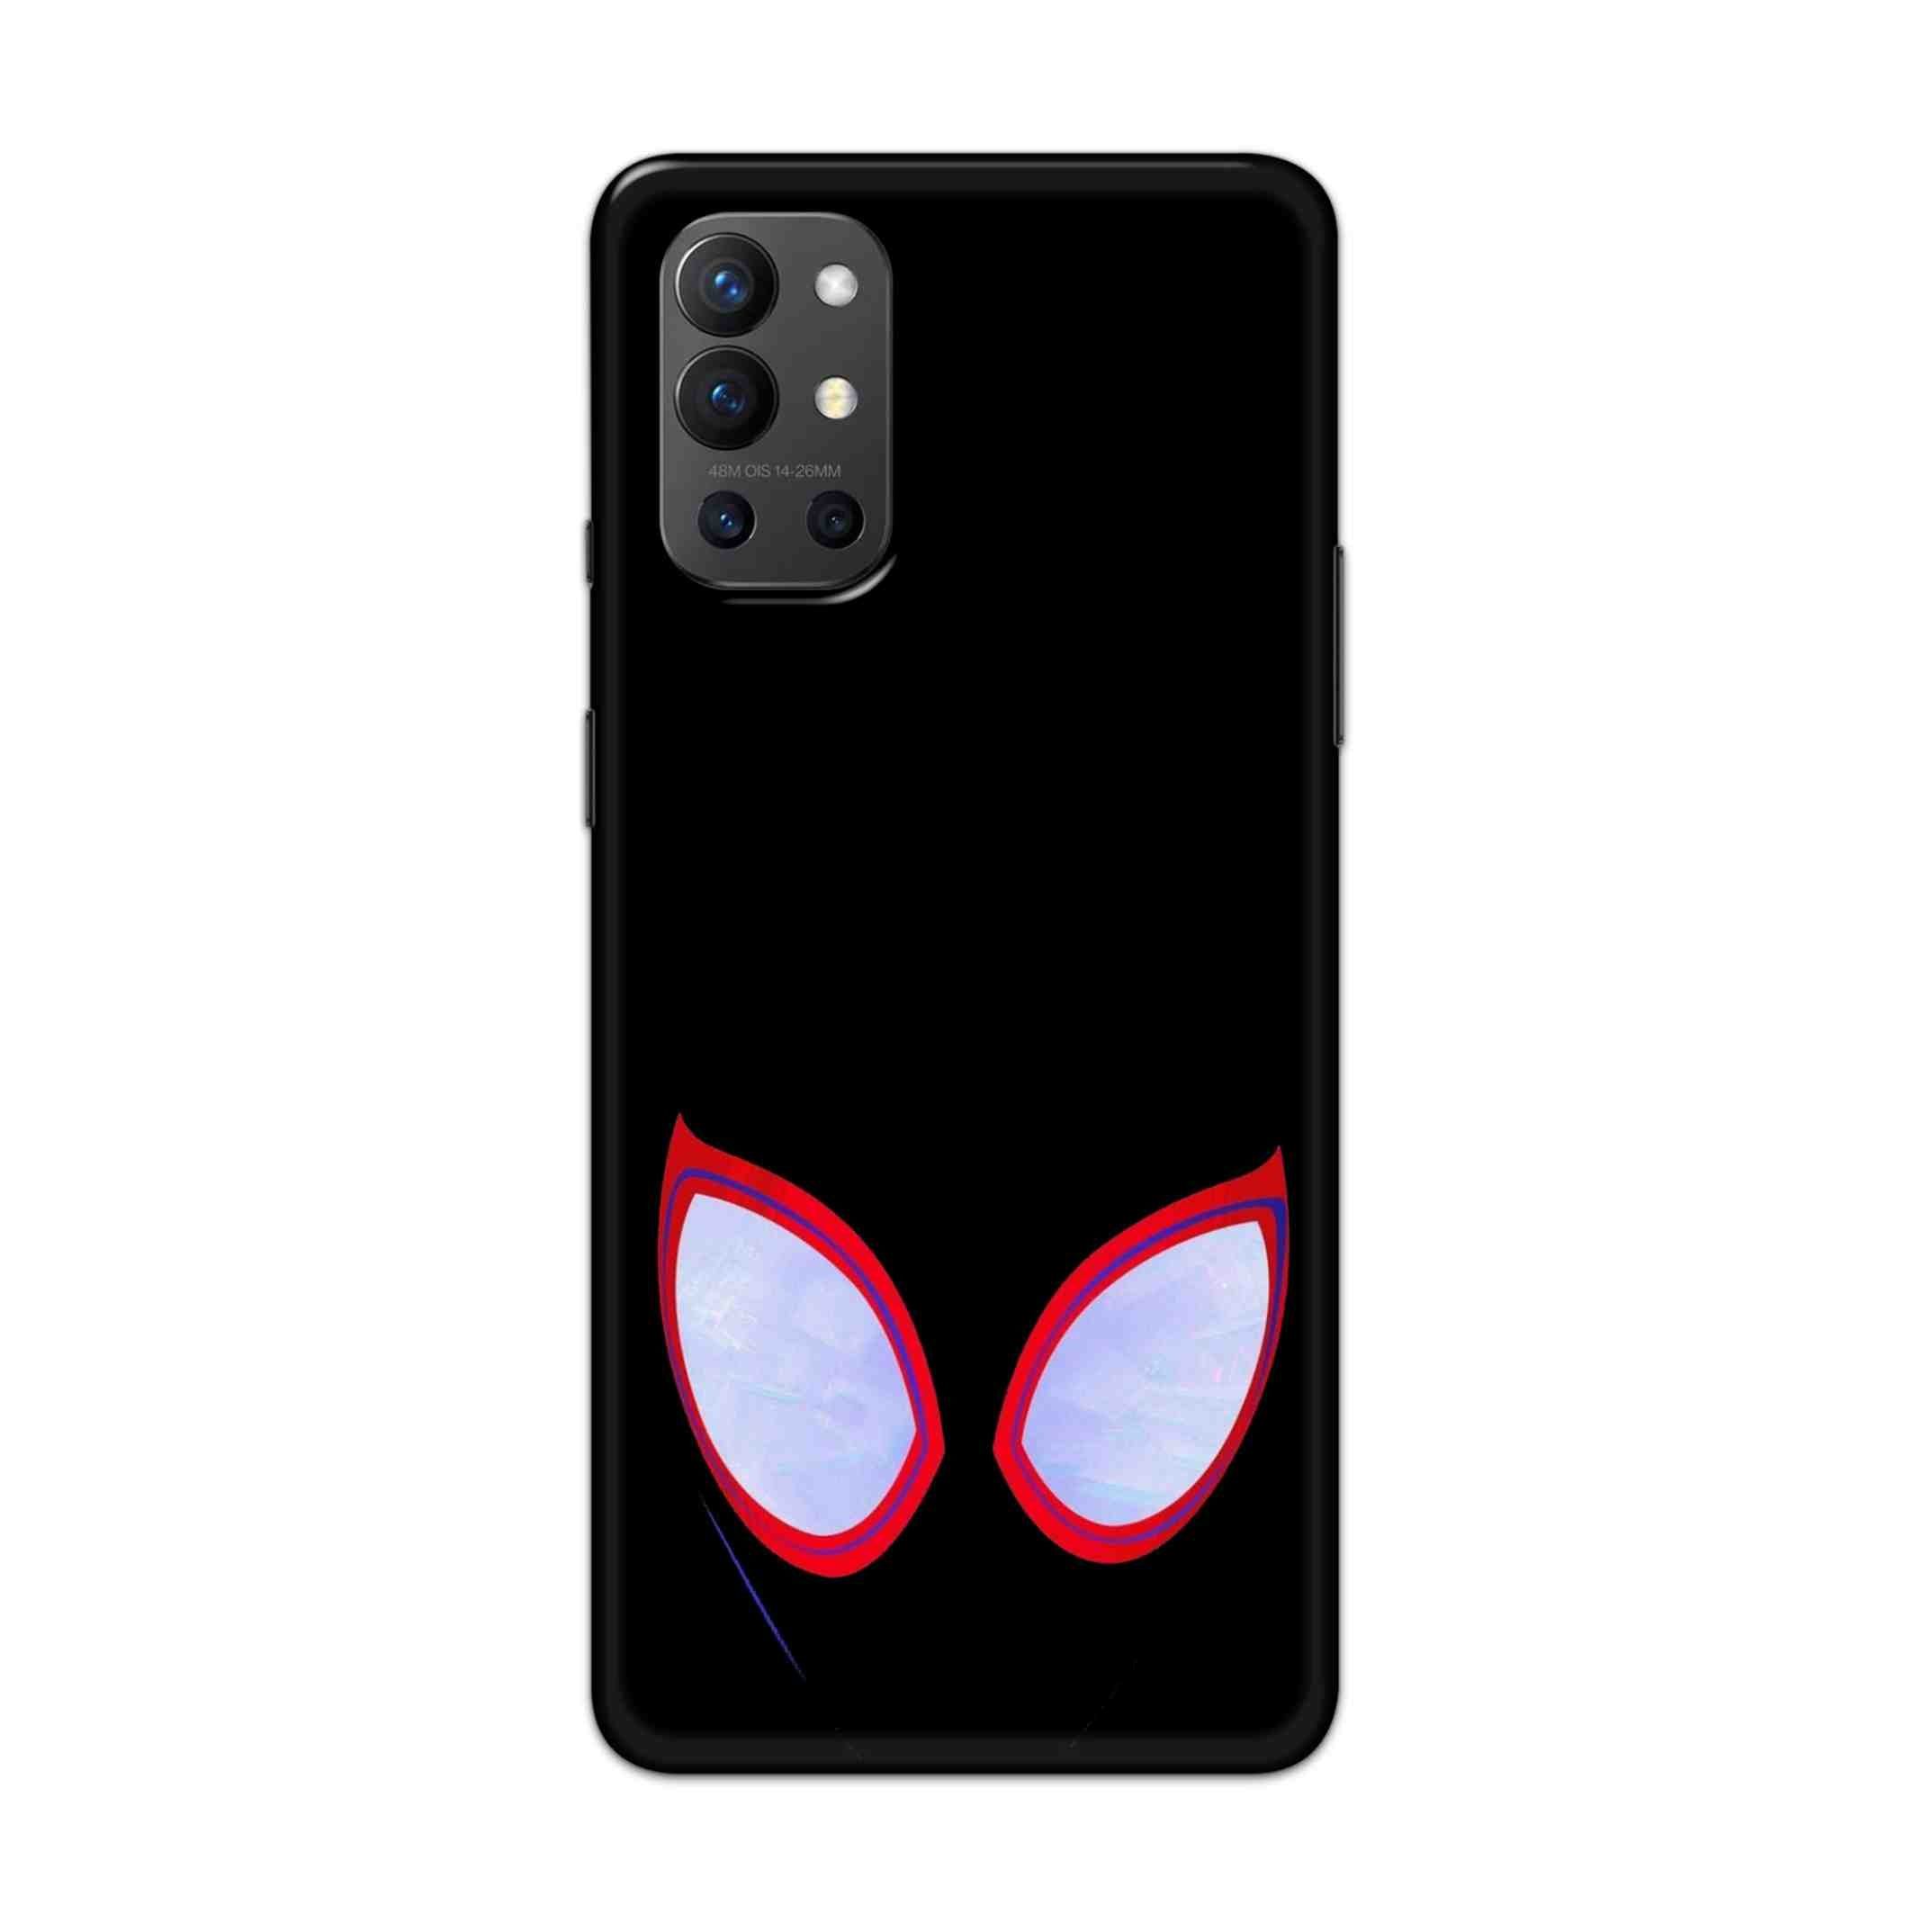 Buy Spiderman Eyes Hard Back Mobile Phone Case Cover For OnePlus 9R / 8T Online